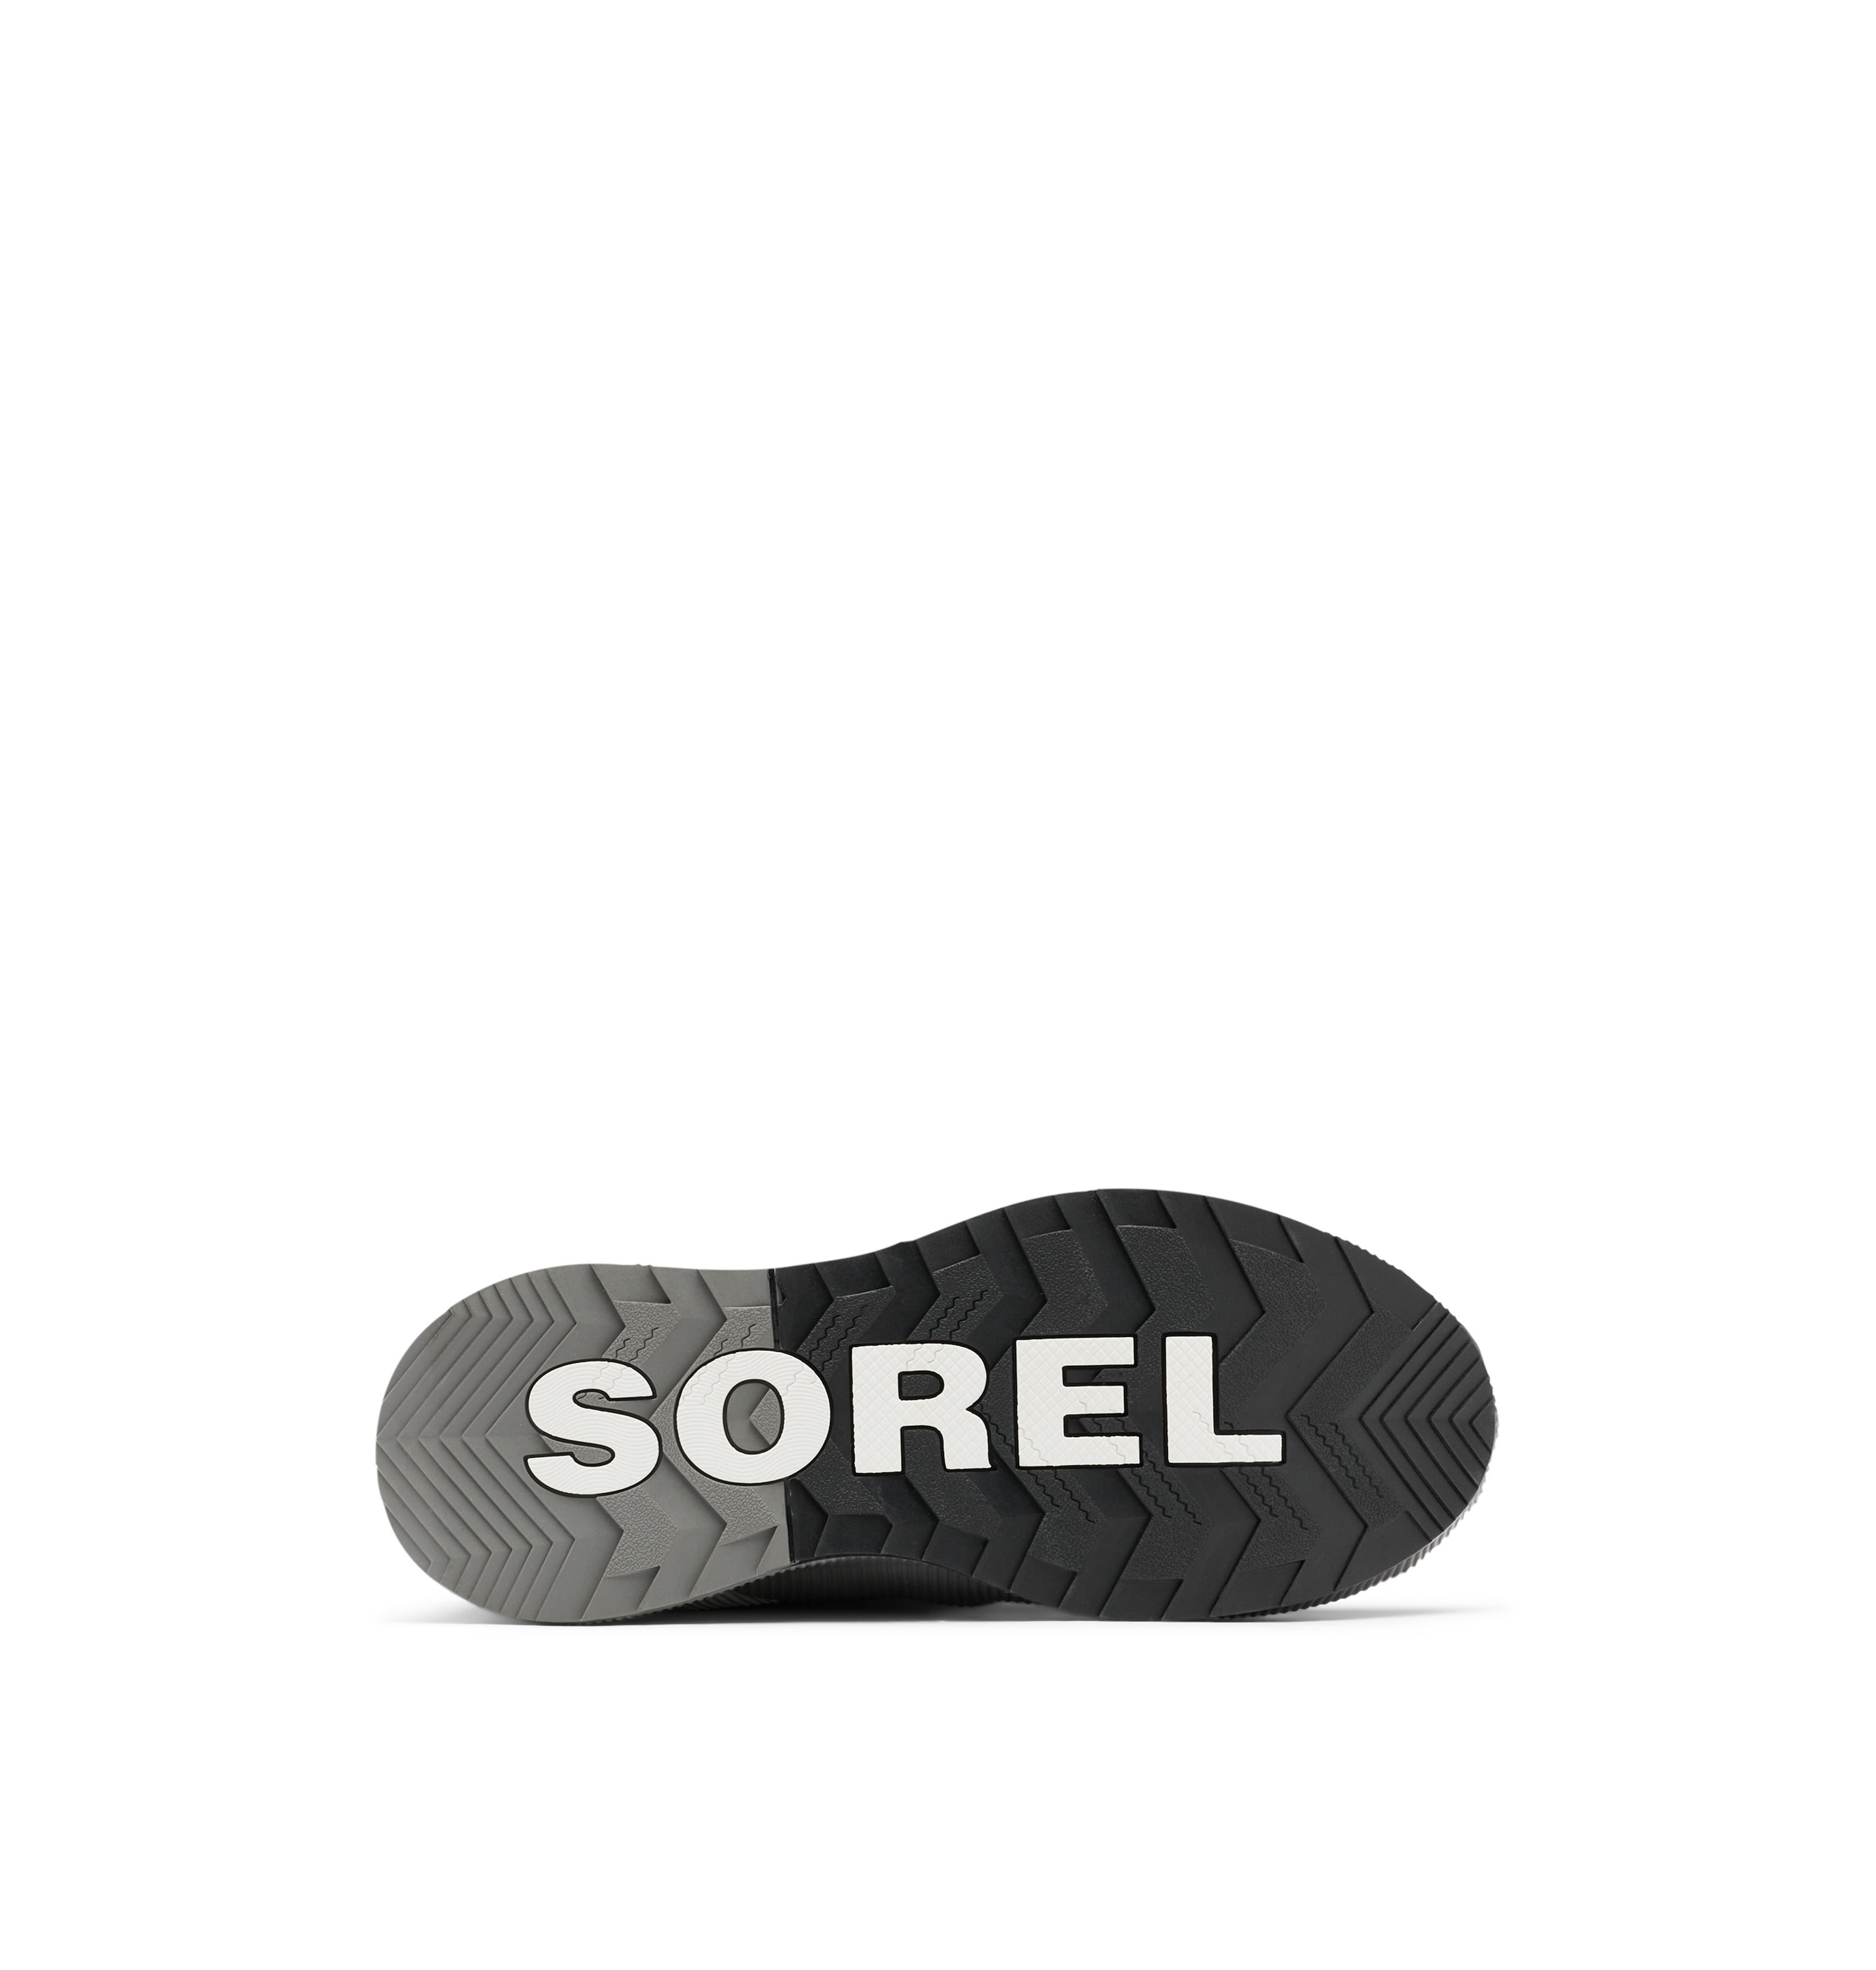 Sorel Out 'N About III Classic Duck Boot Women's